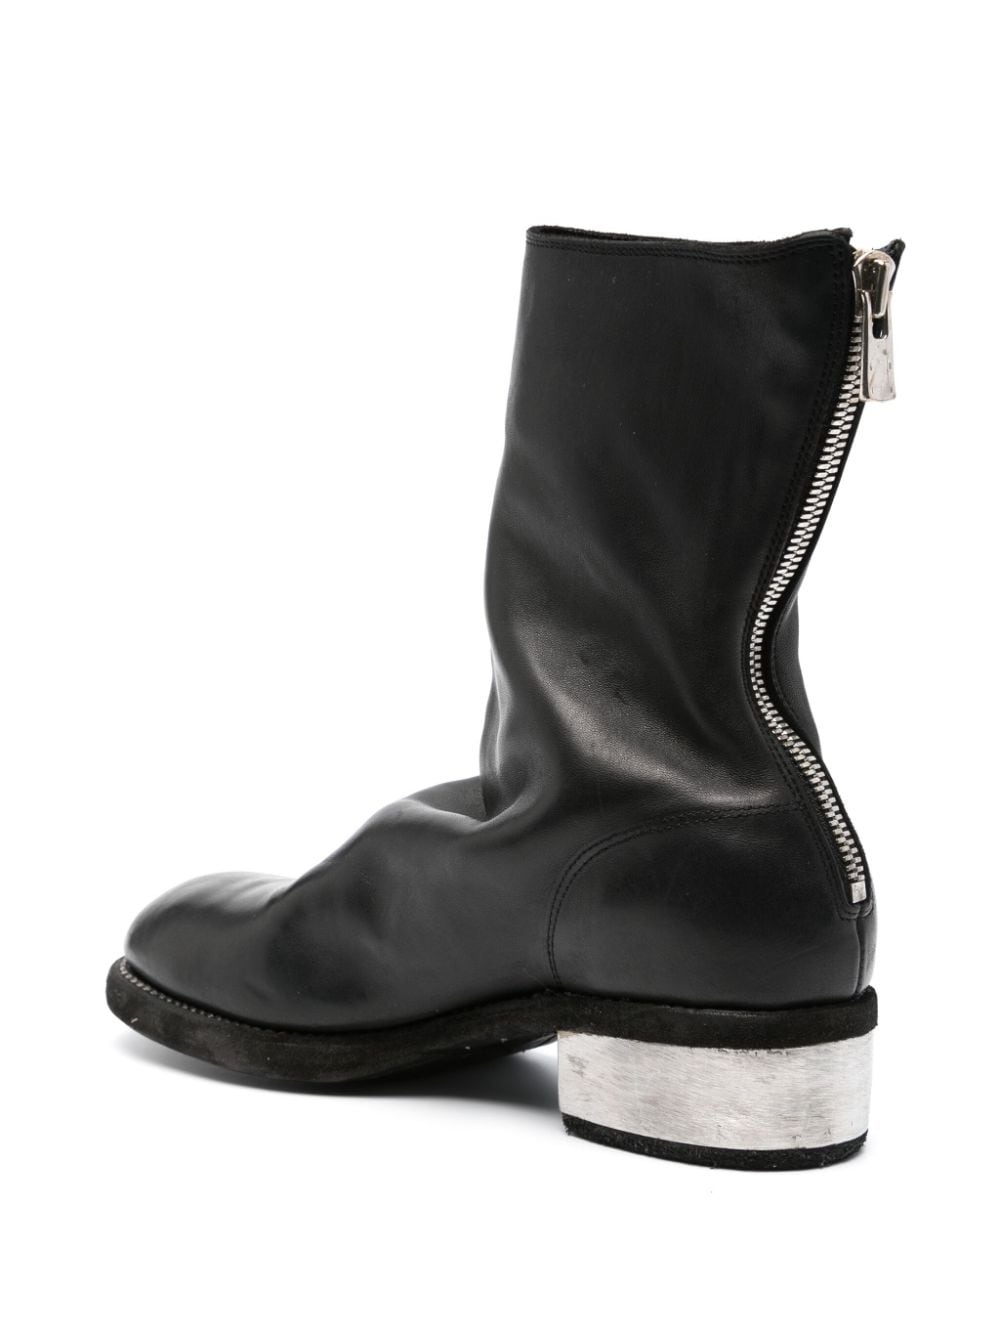 round-toe leather boots - 3